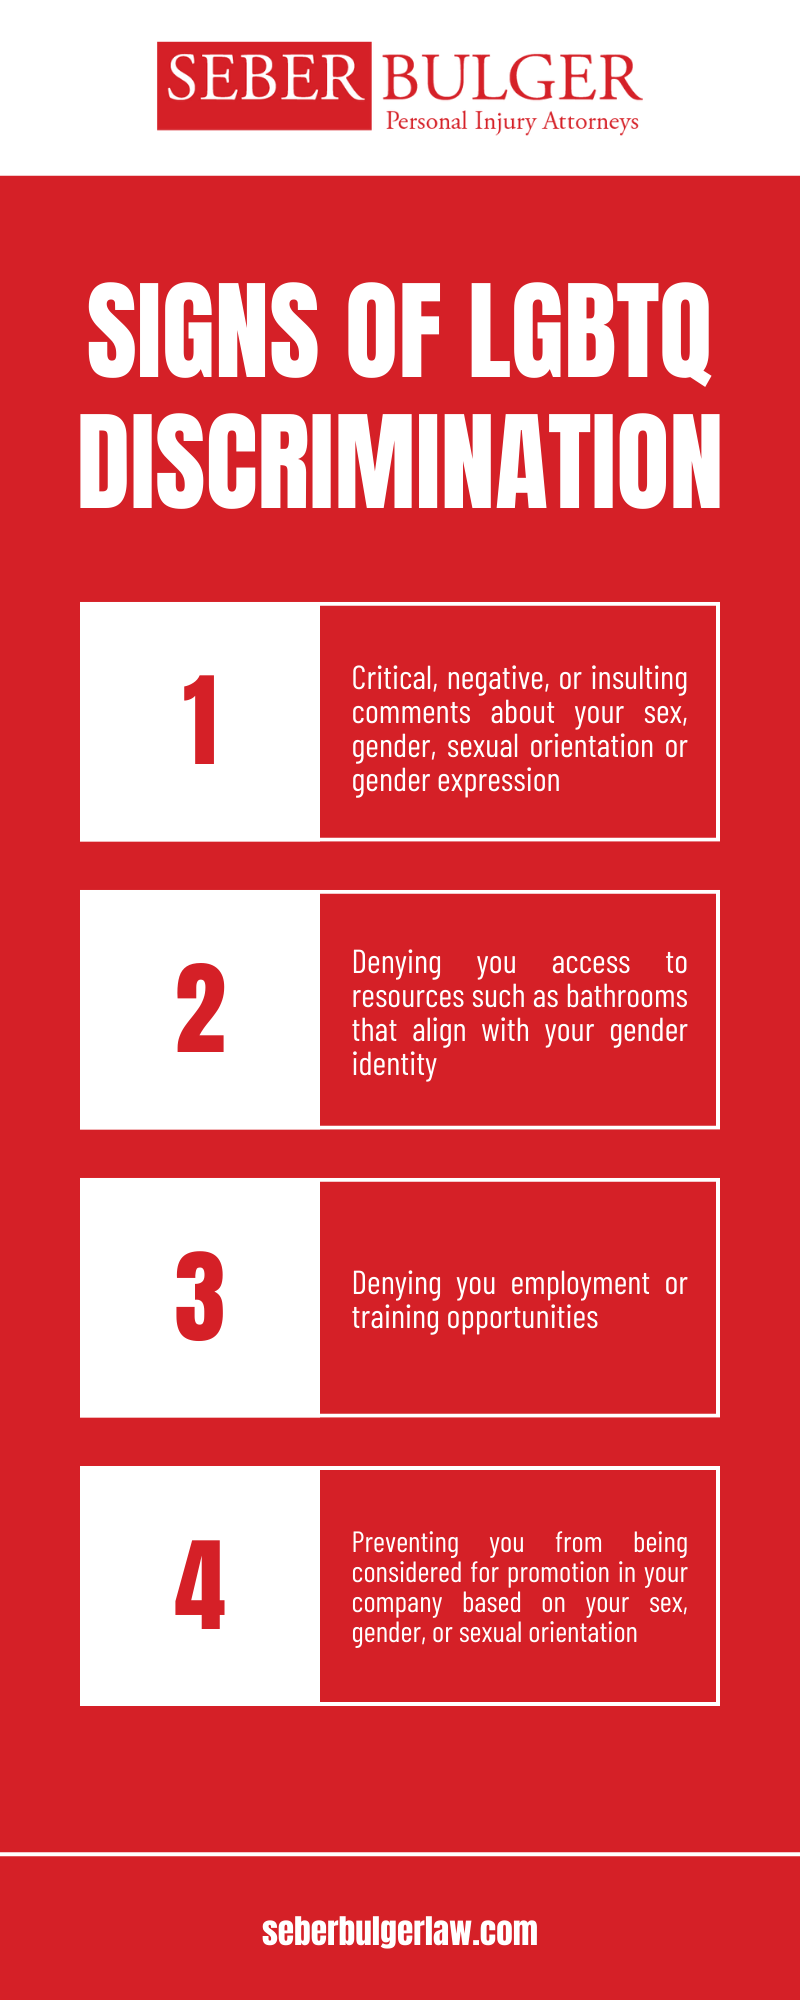 SIGNS OF LGBTQ DISCRIMINATION INFOGRAPHIC